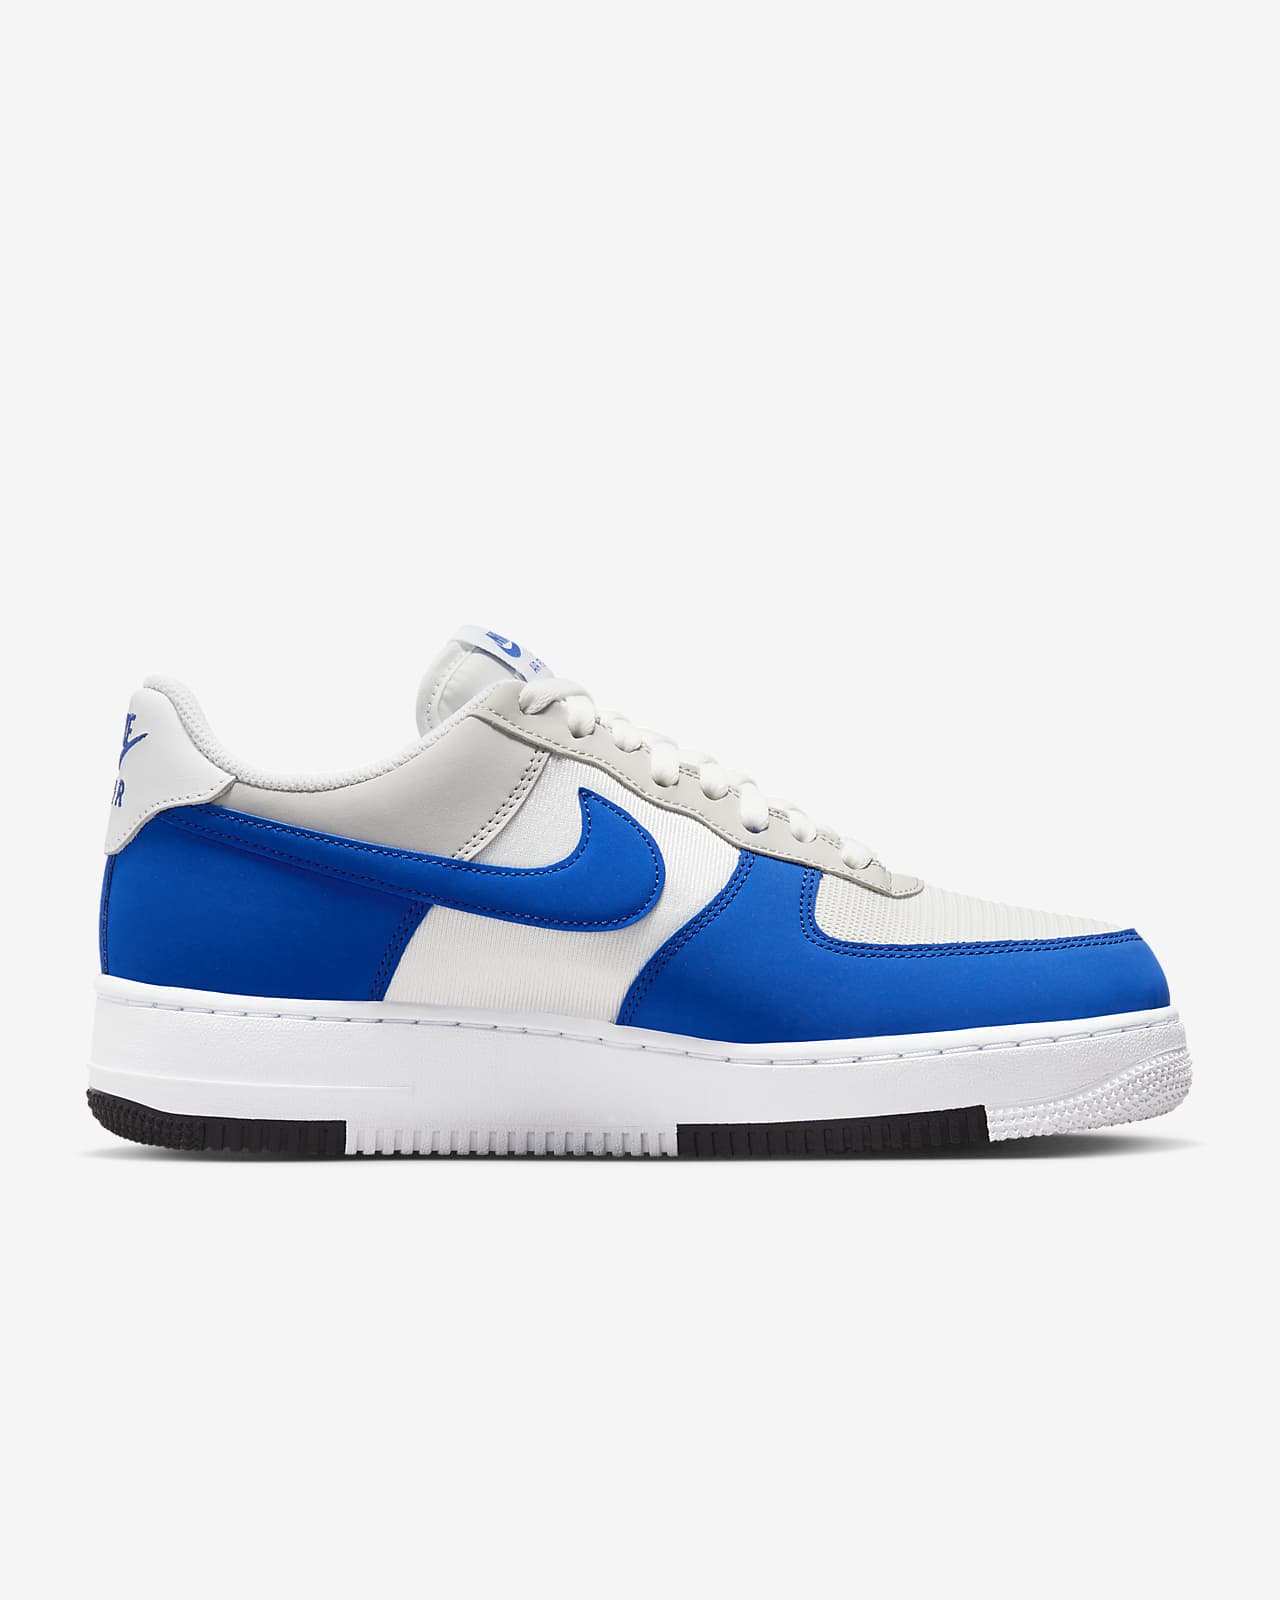 Nike Air Force 1 LV8 Men's Shoes